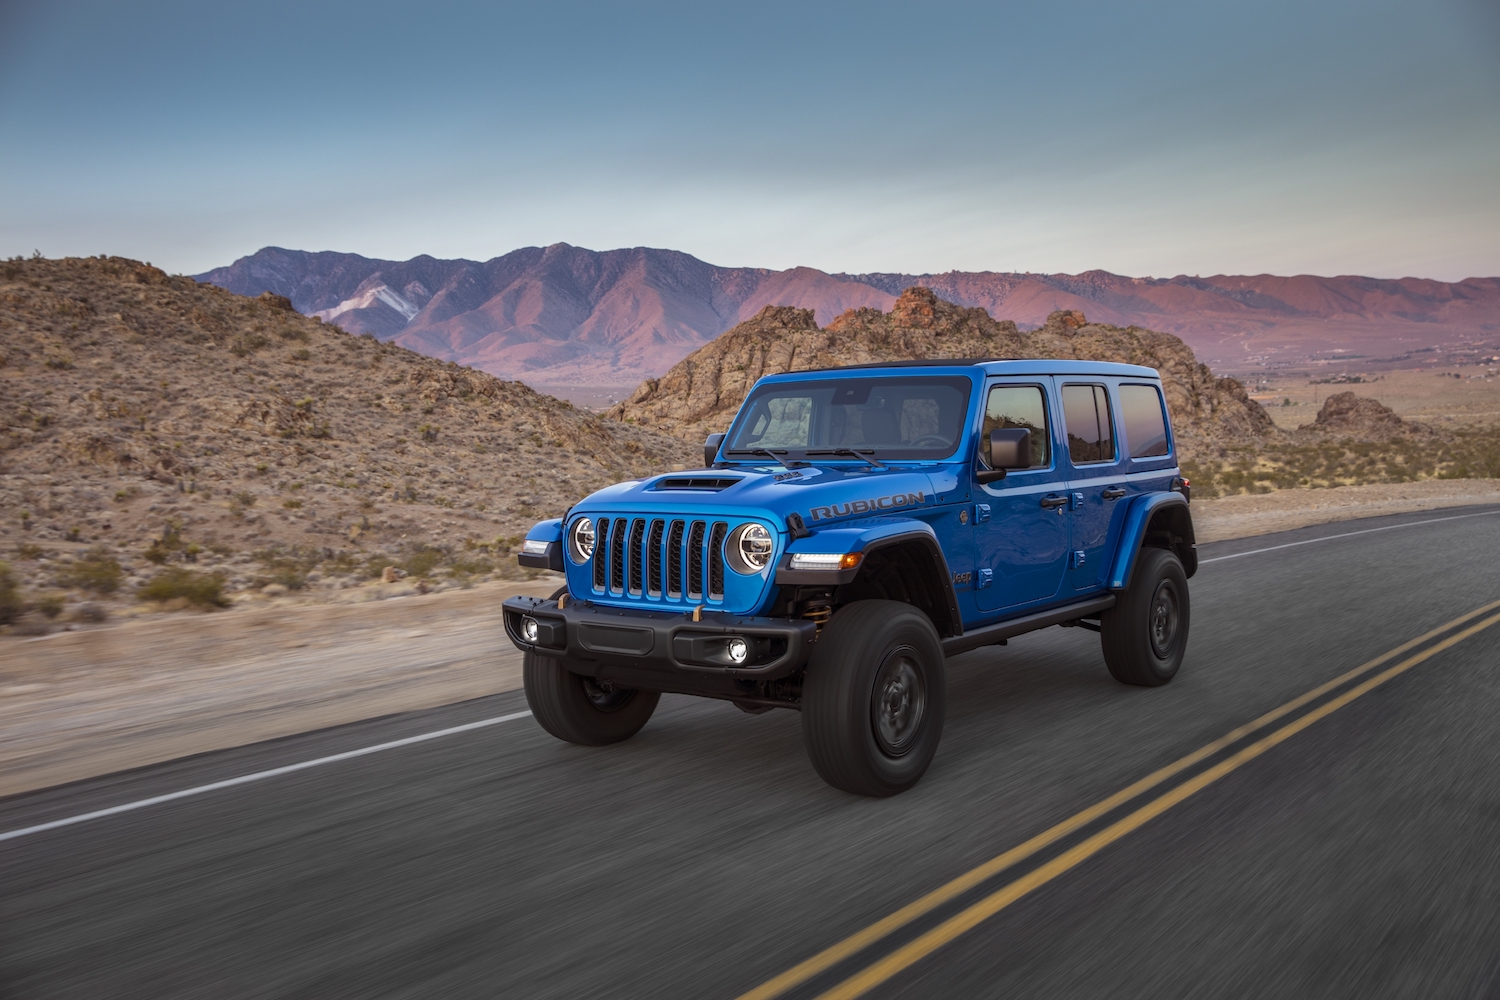 Is the 2021 Jeep Wrangler Safe? We Take a Look at the Crash Test Results